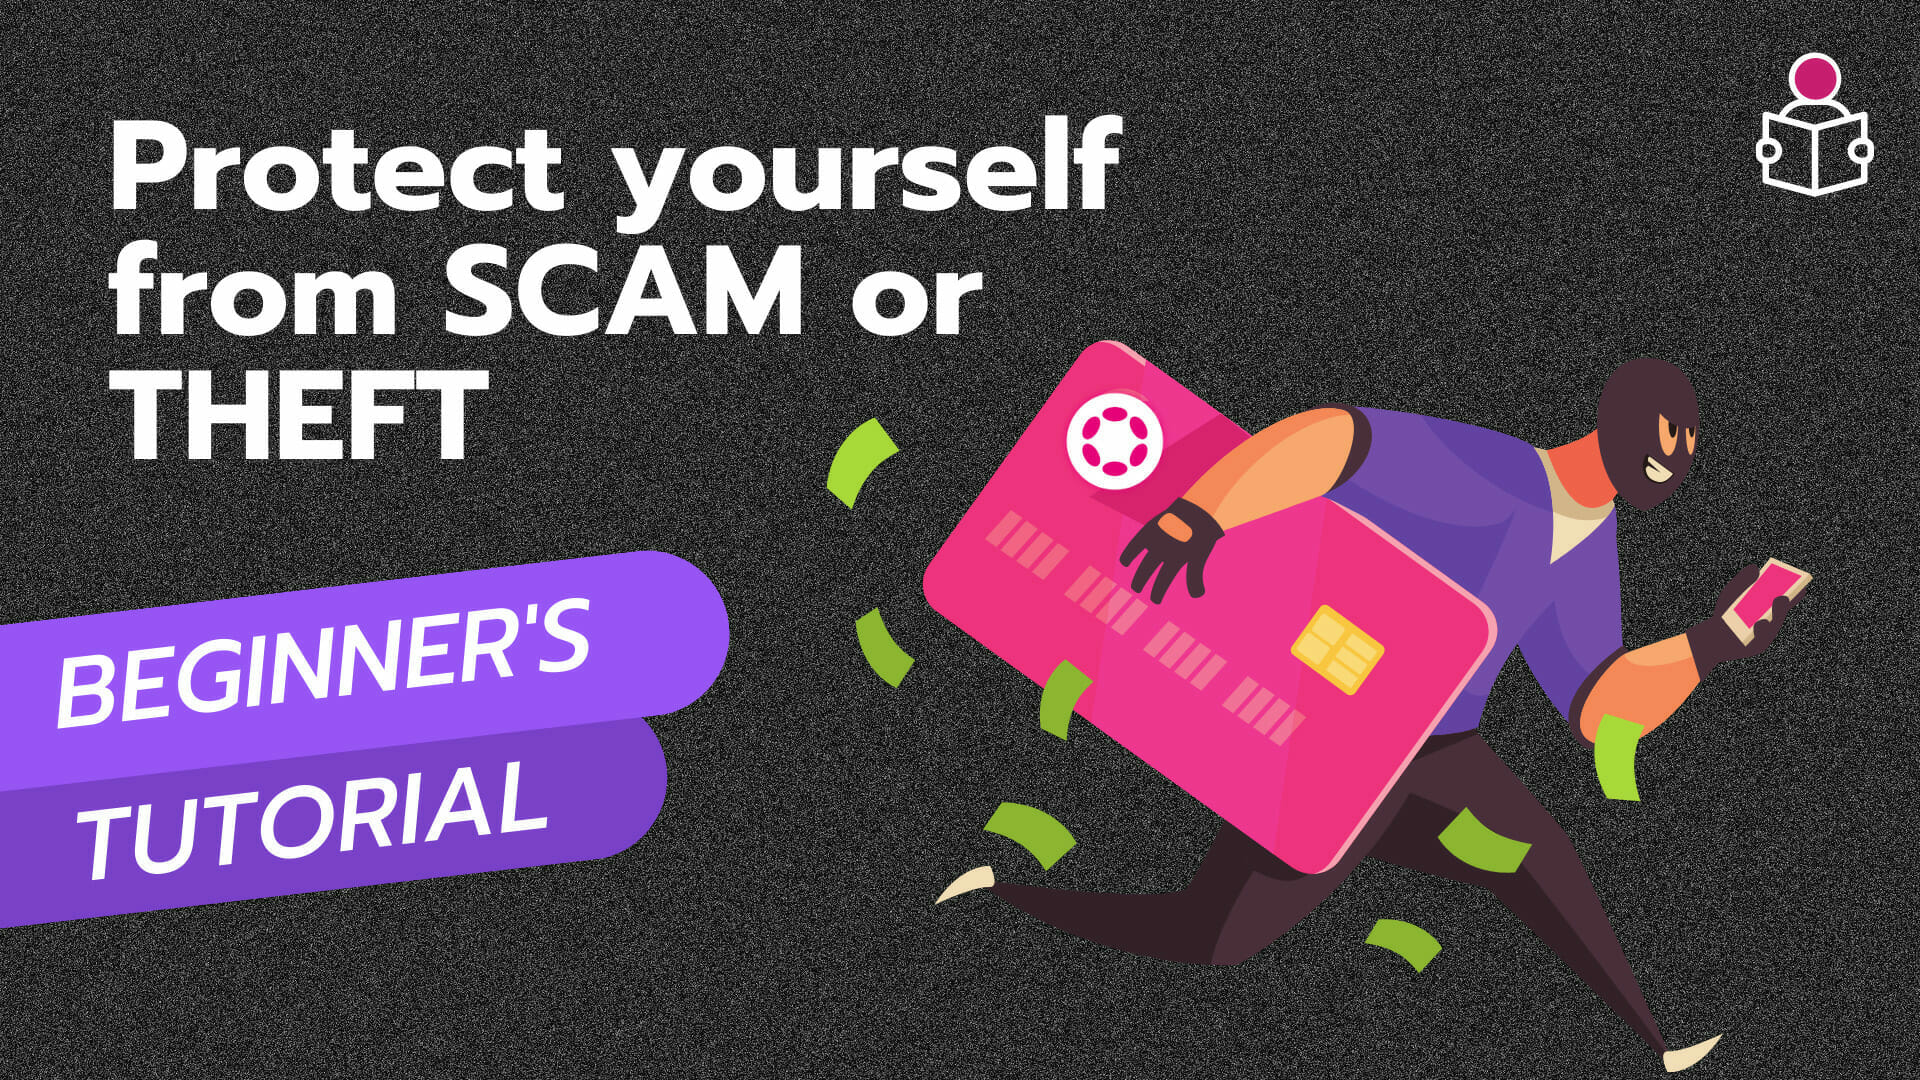 Protect yourself from Scam or Theft - Describedot